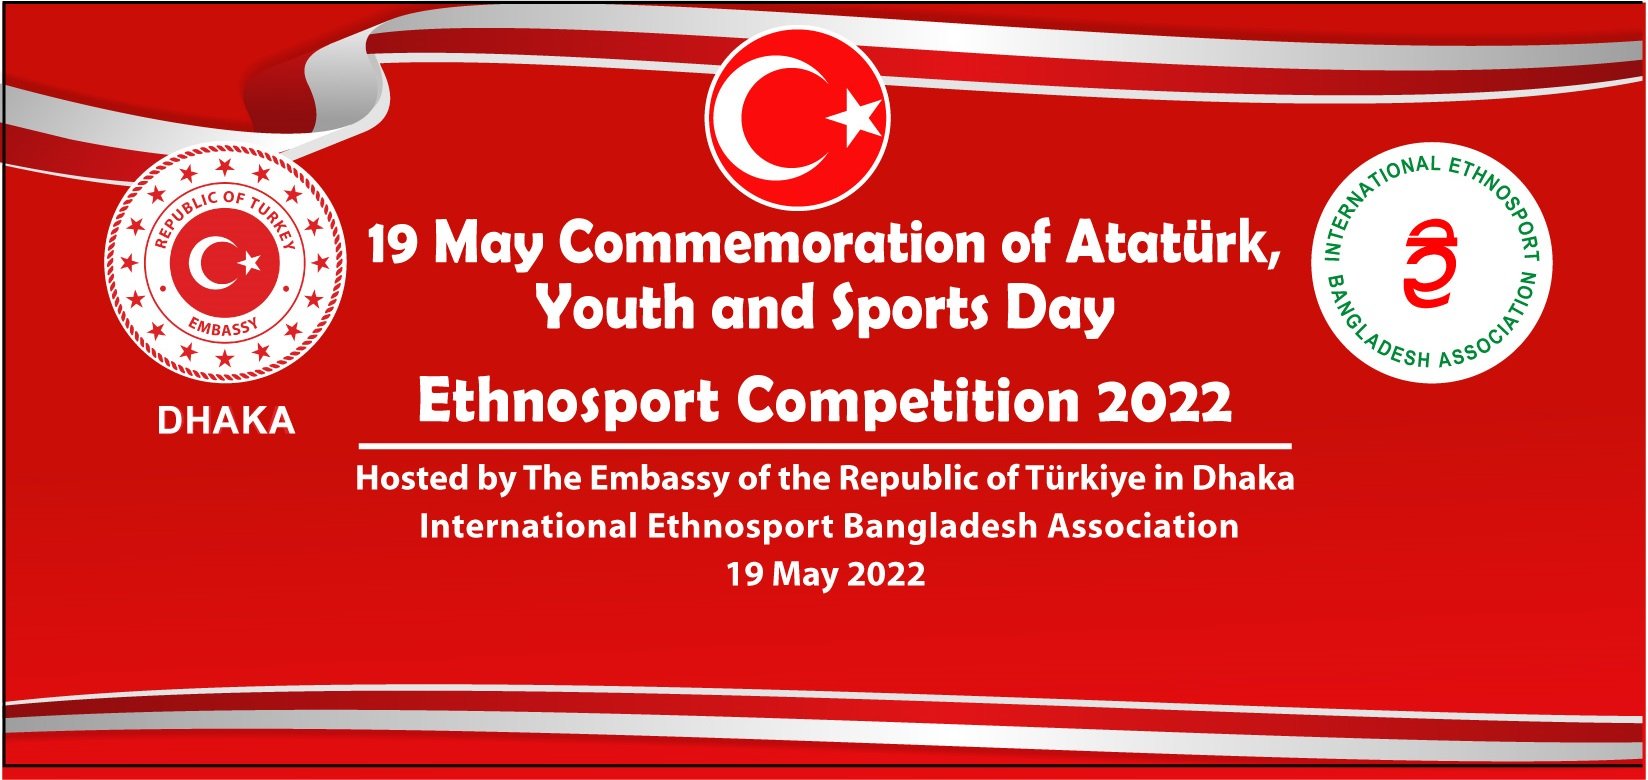 19 May Commemoration of Atatürk, Youth and Sports Day Ethnosport Competition 2022